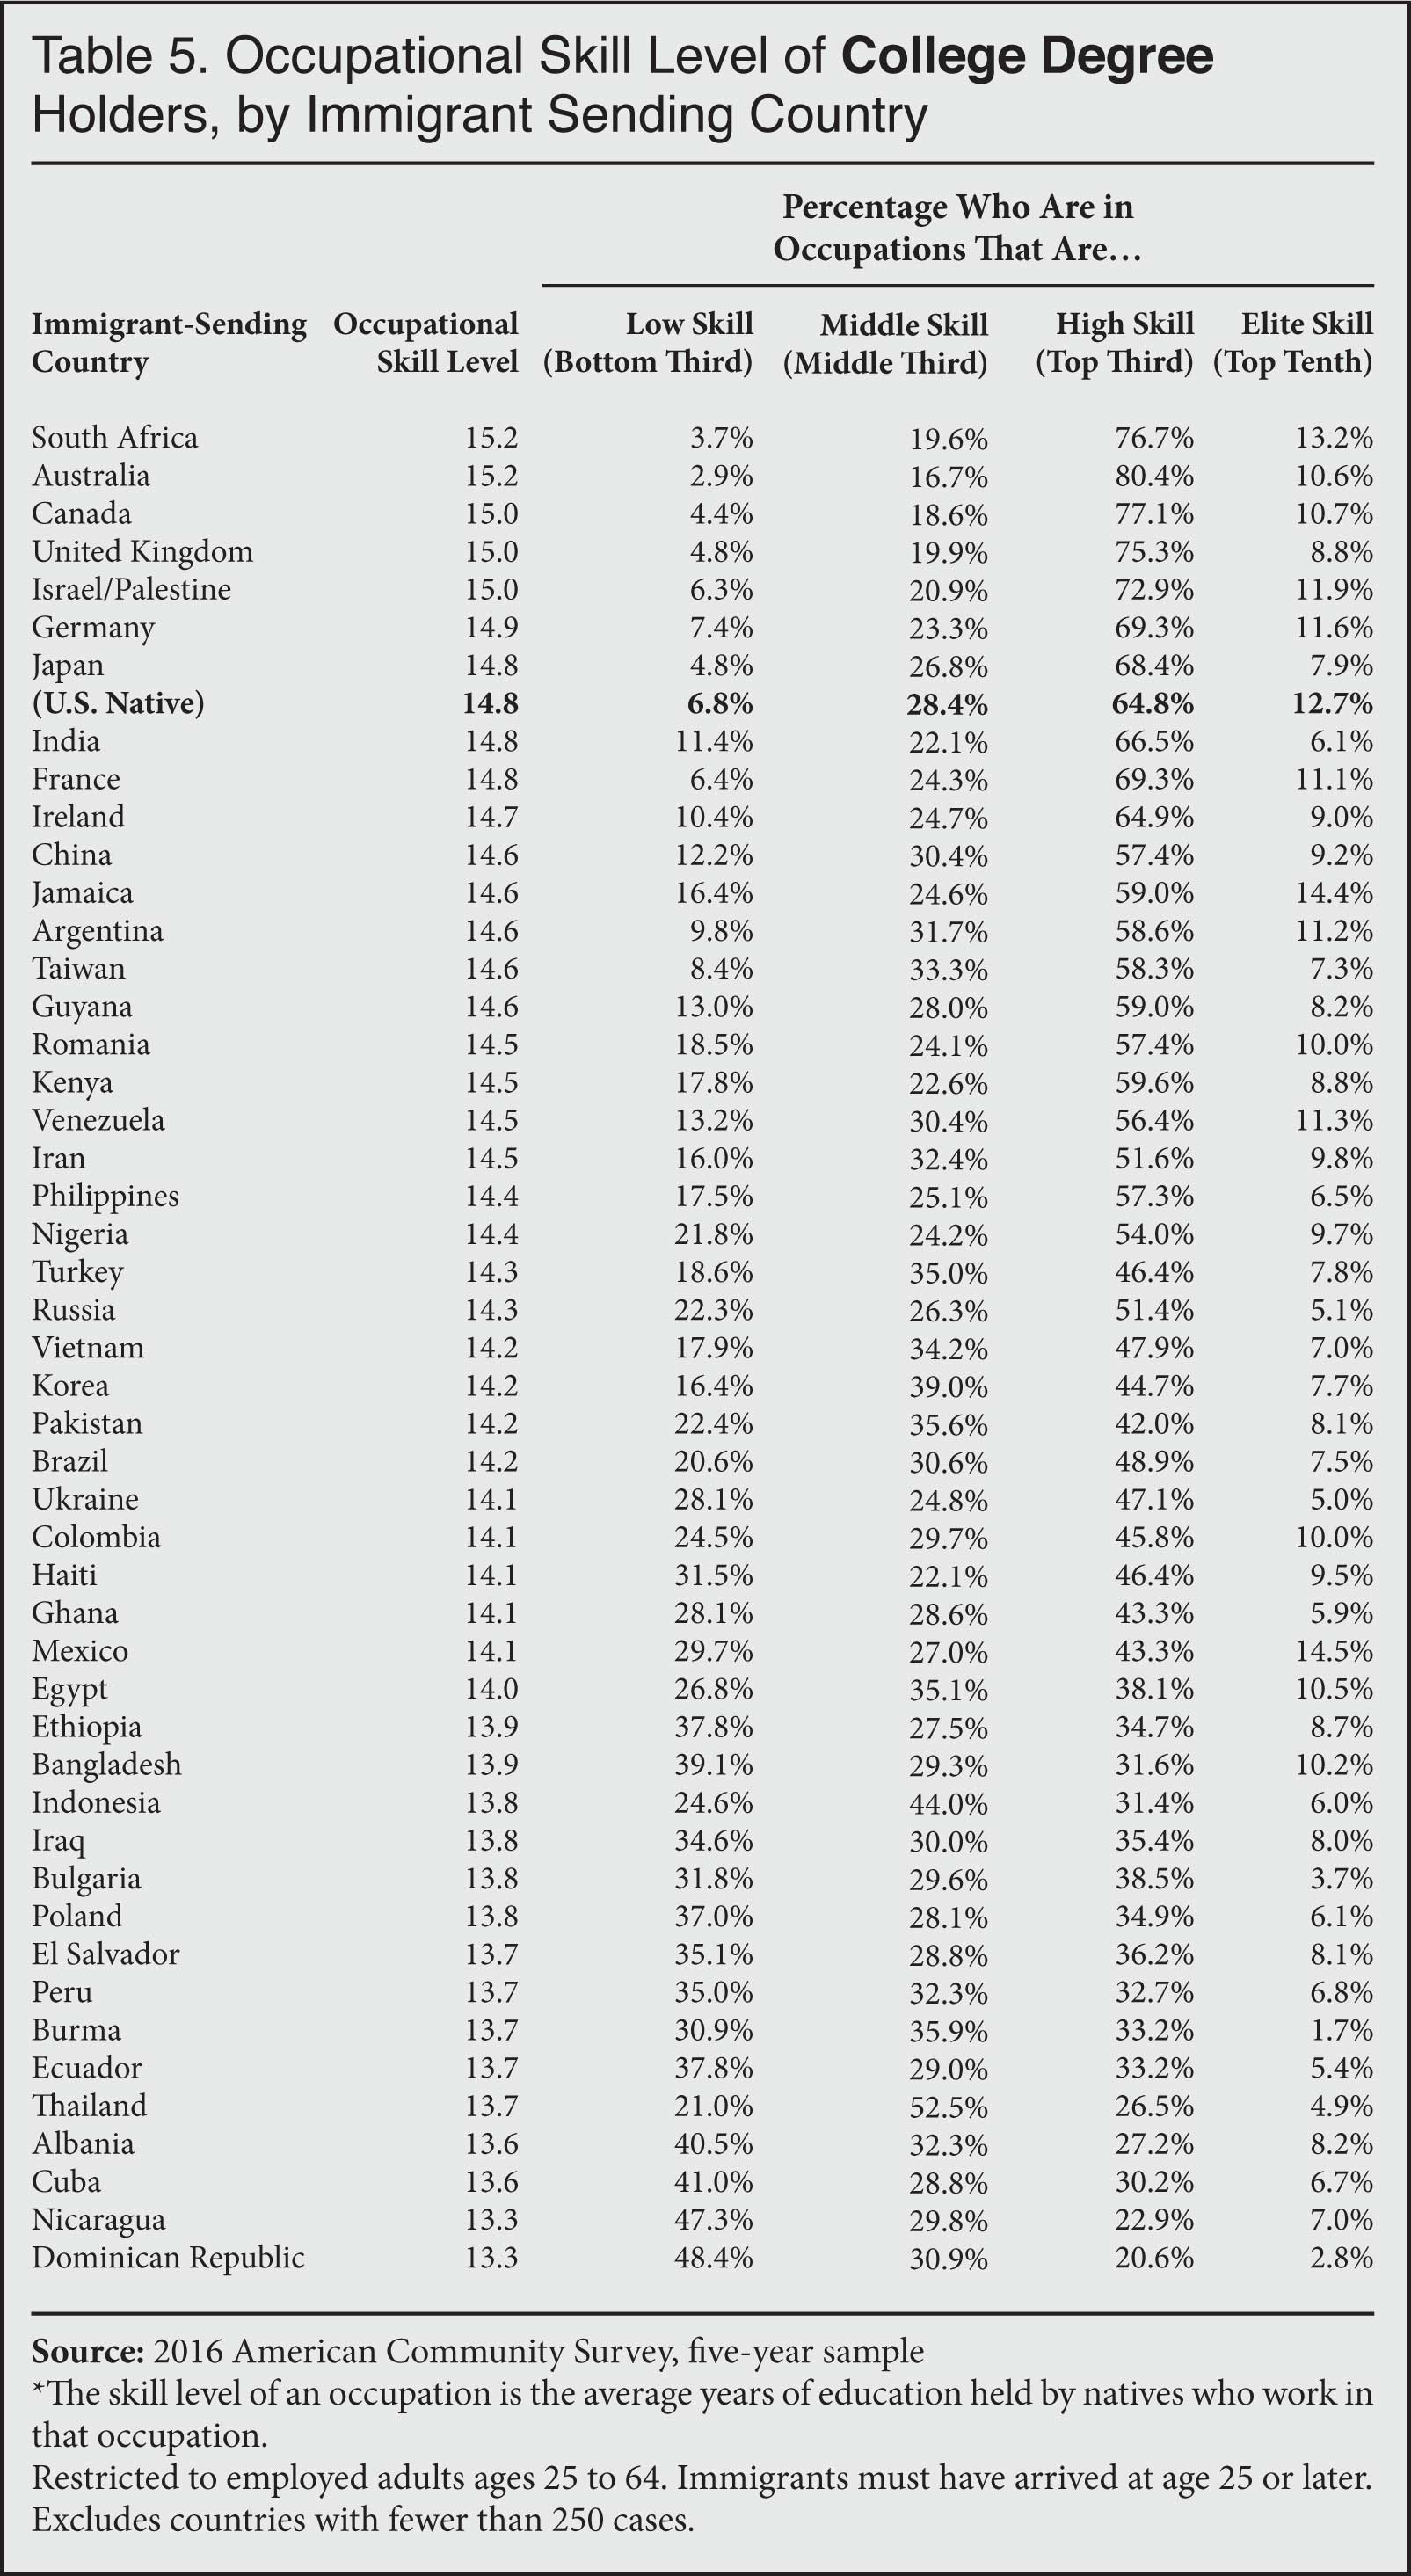 Table: Occupational Skill Level of College Degree Holders, by Immigrant Sending Country